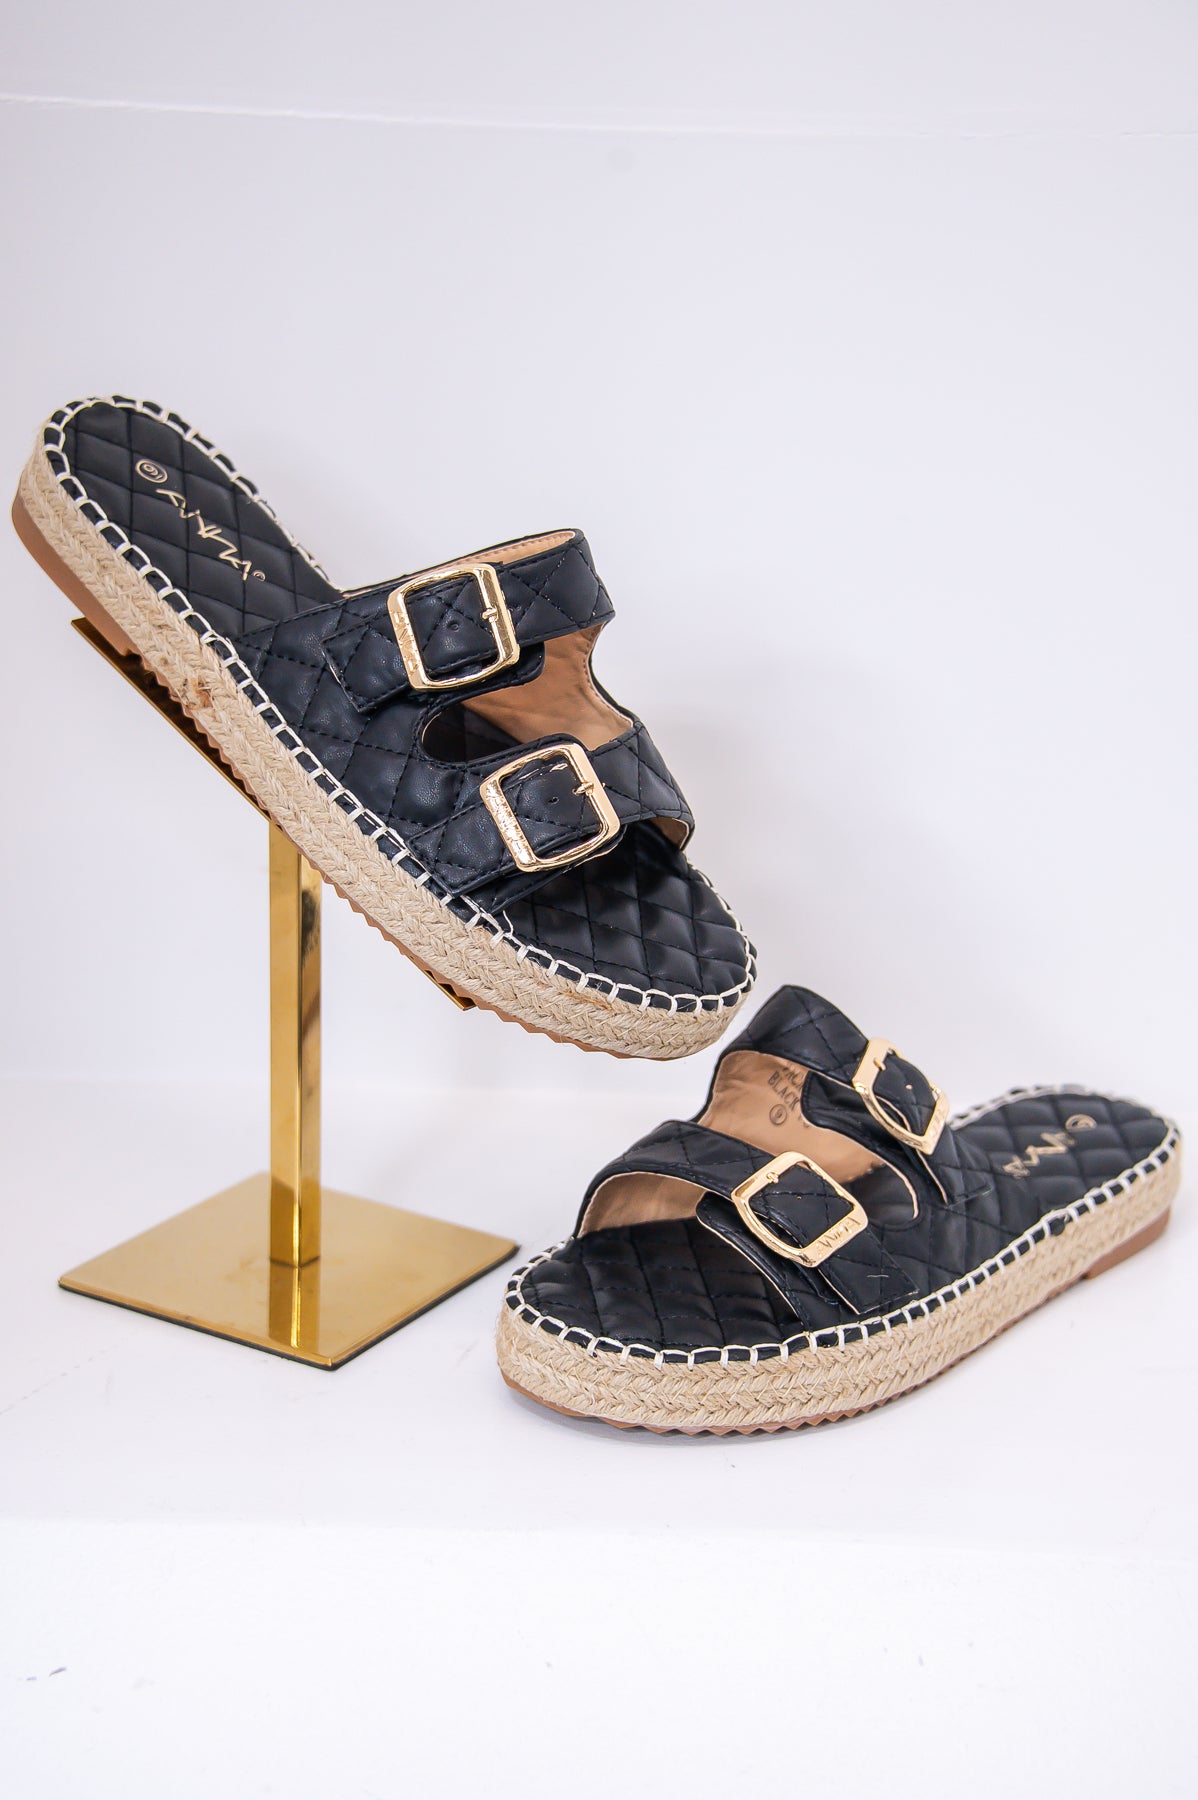 Journeys Begin With One Step Black Quilted Sandals - SHO2660BK